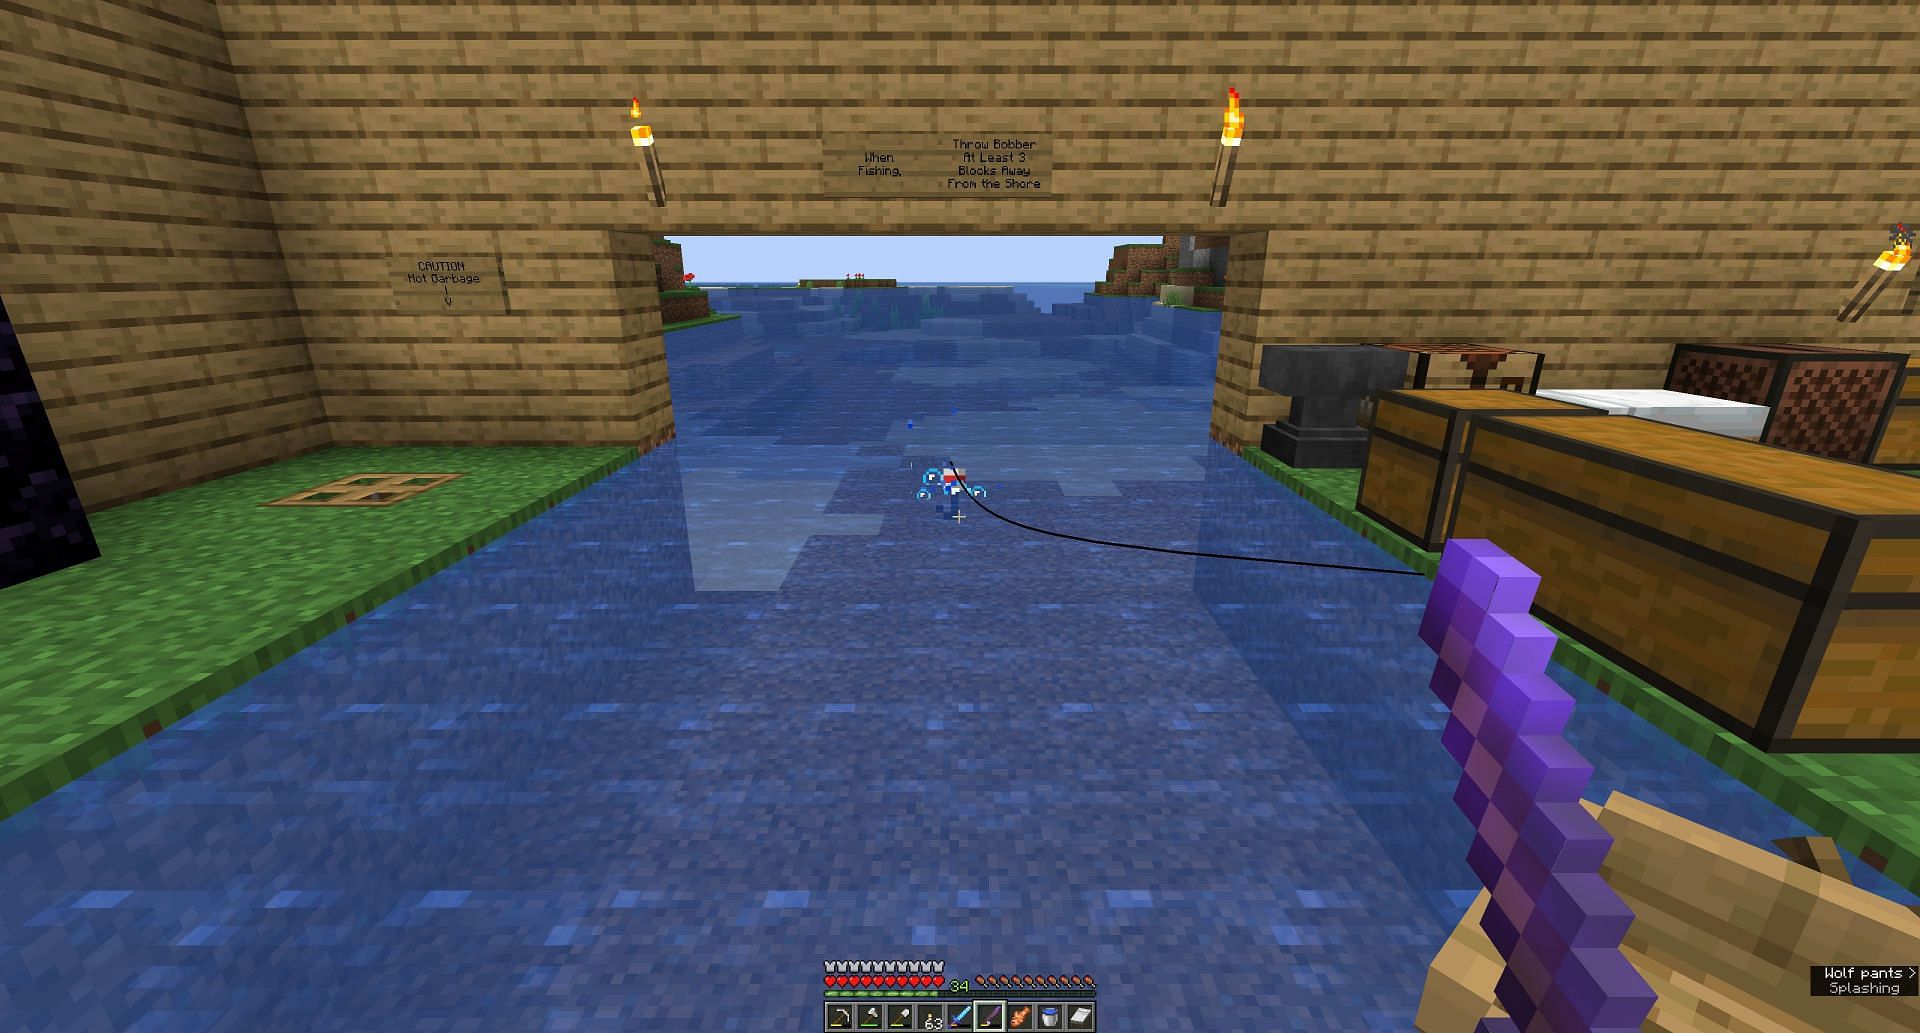 Enchanted rods are great for fishing, which gives lots of XP (Image via Minecraft)